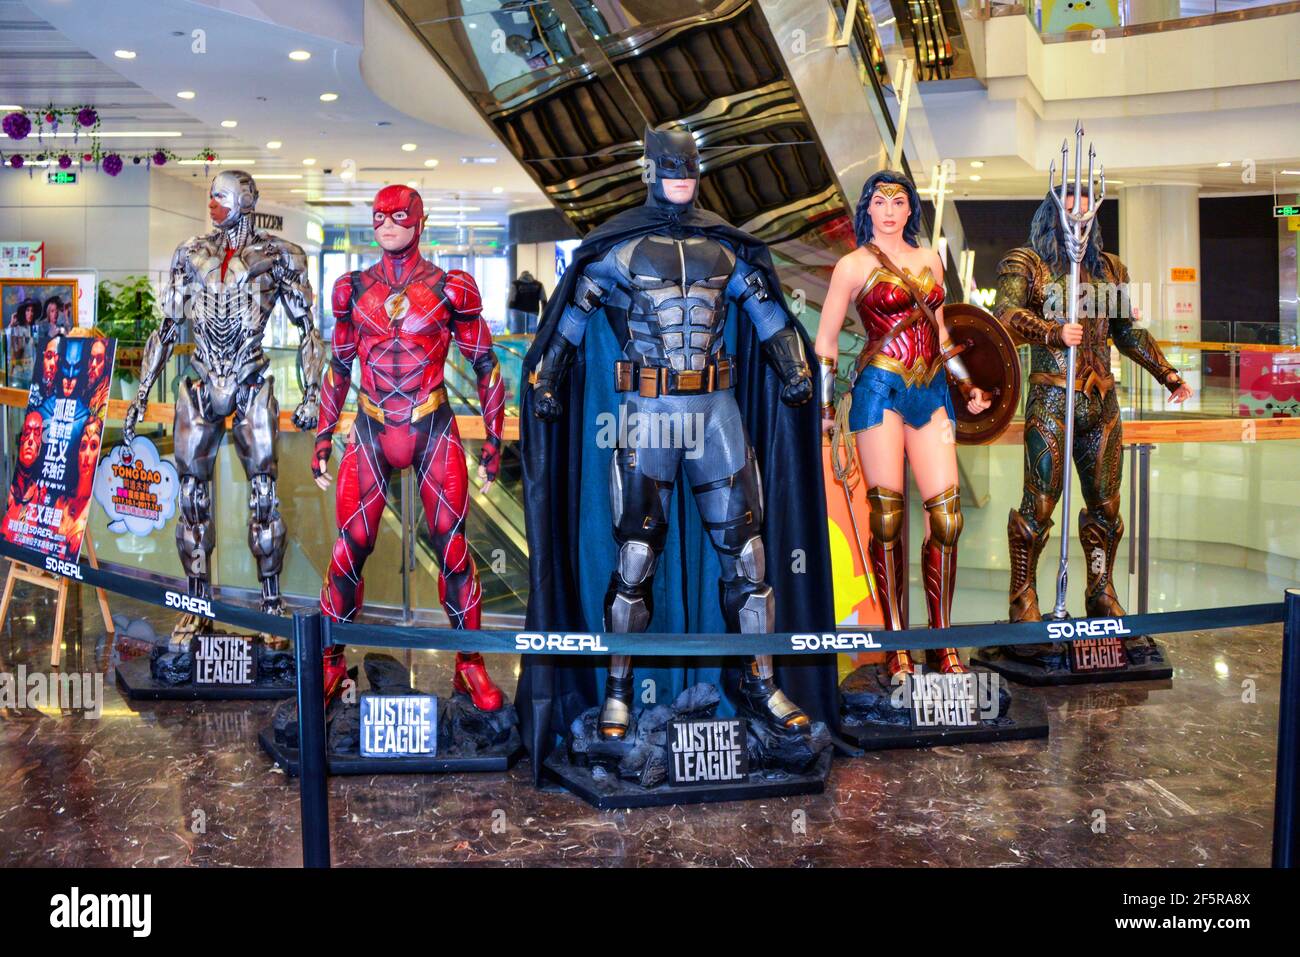 Beijing, China - November 10, 2017:  Statues of characters, Cyborg, The Flash, Batman, Wonder Woman and Acquaman in Justice League movie on display in Stock Photo